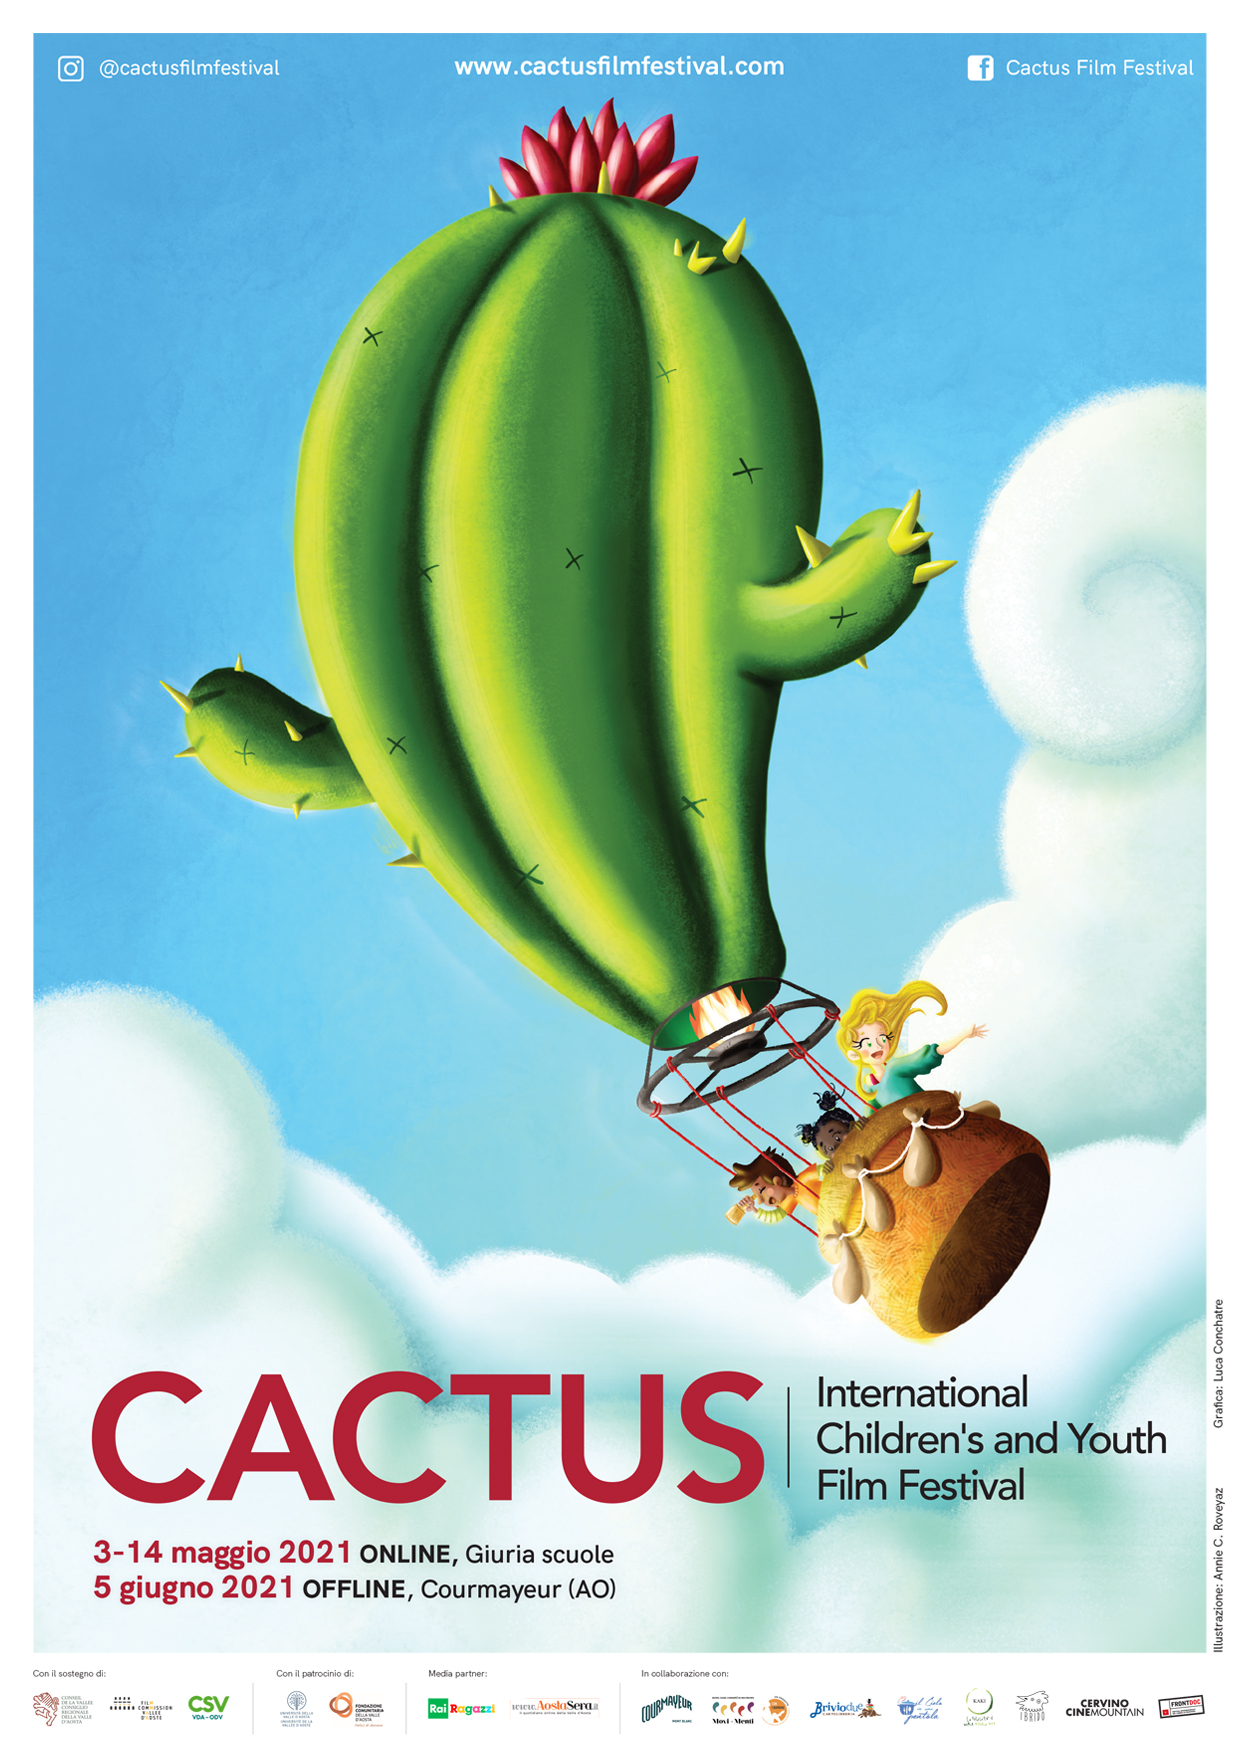 Cactus International Children’s and Youth Film Festival